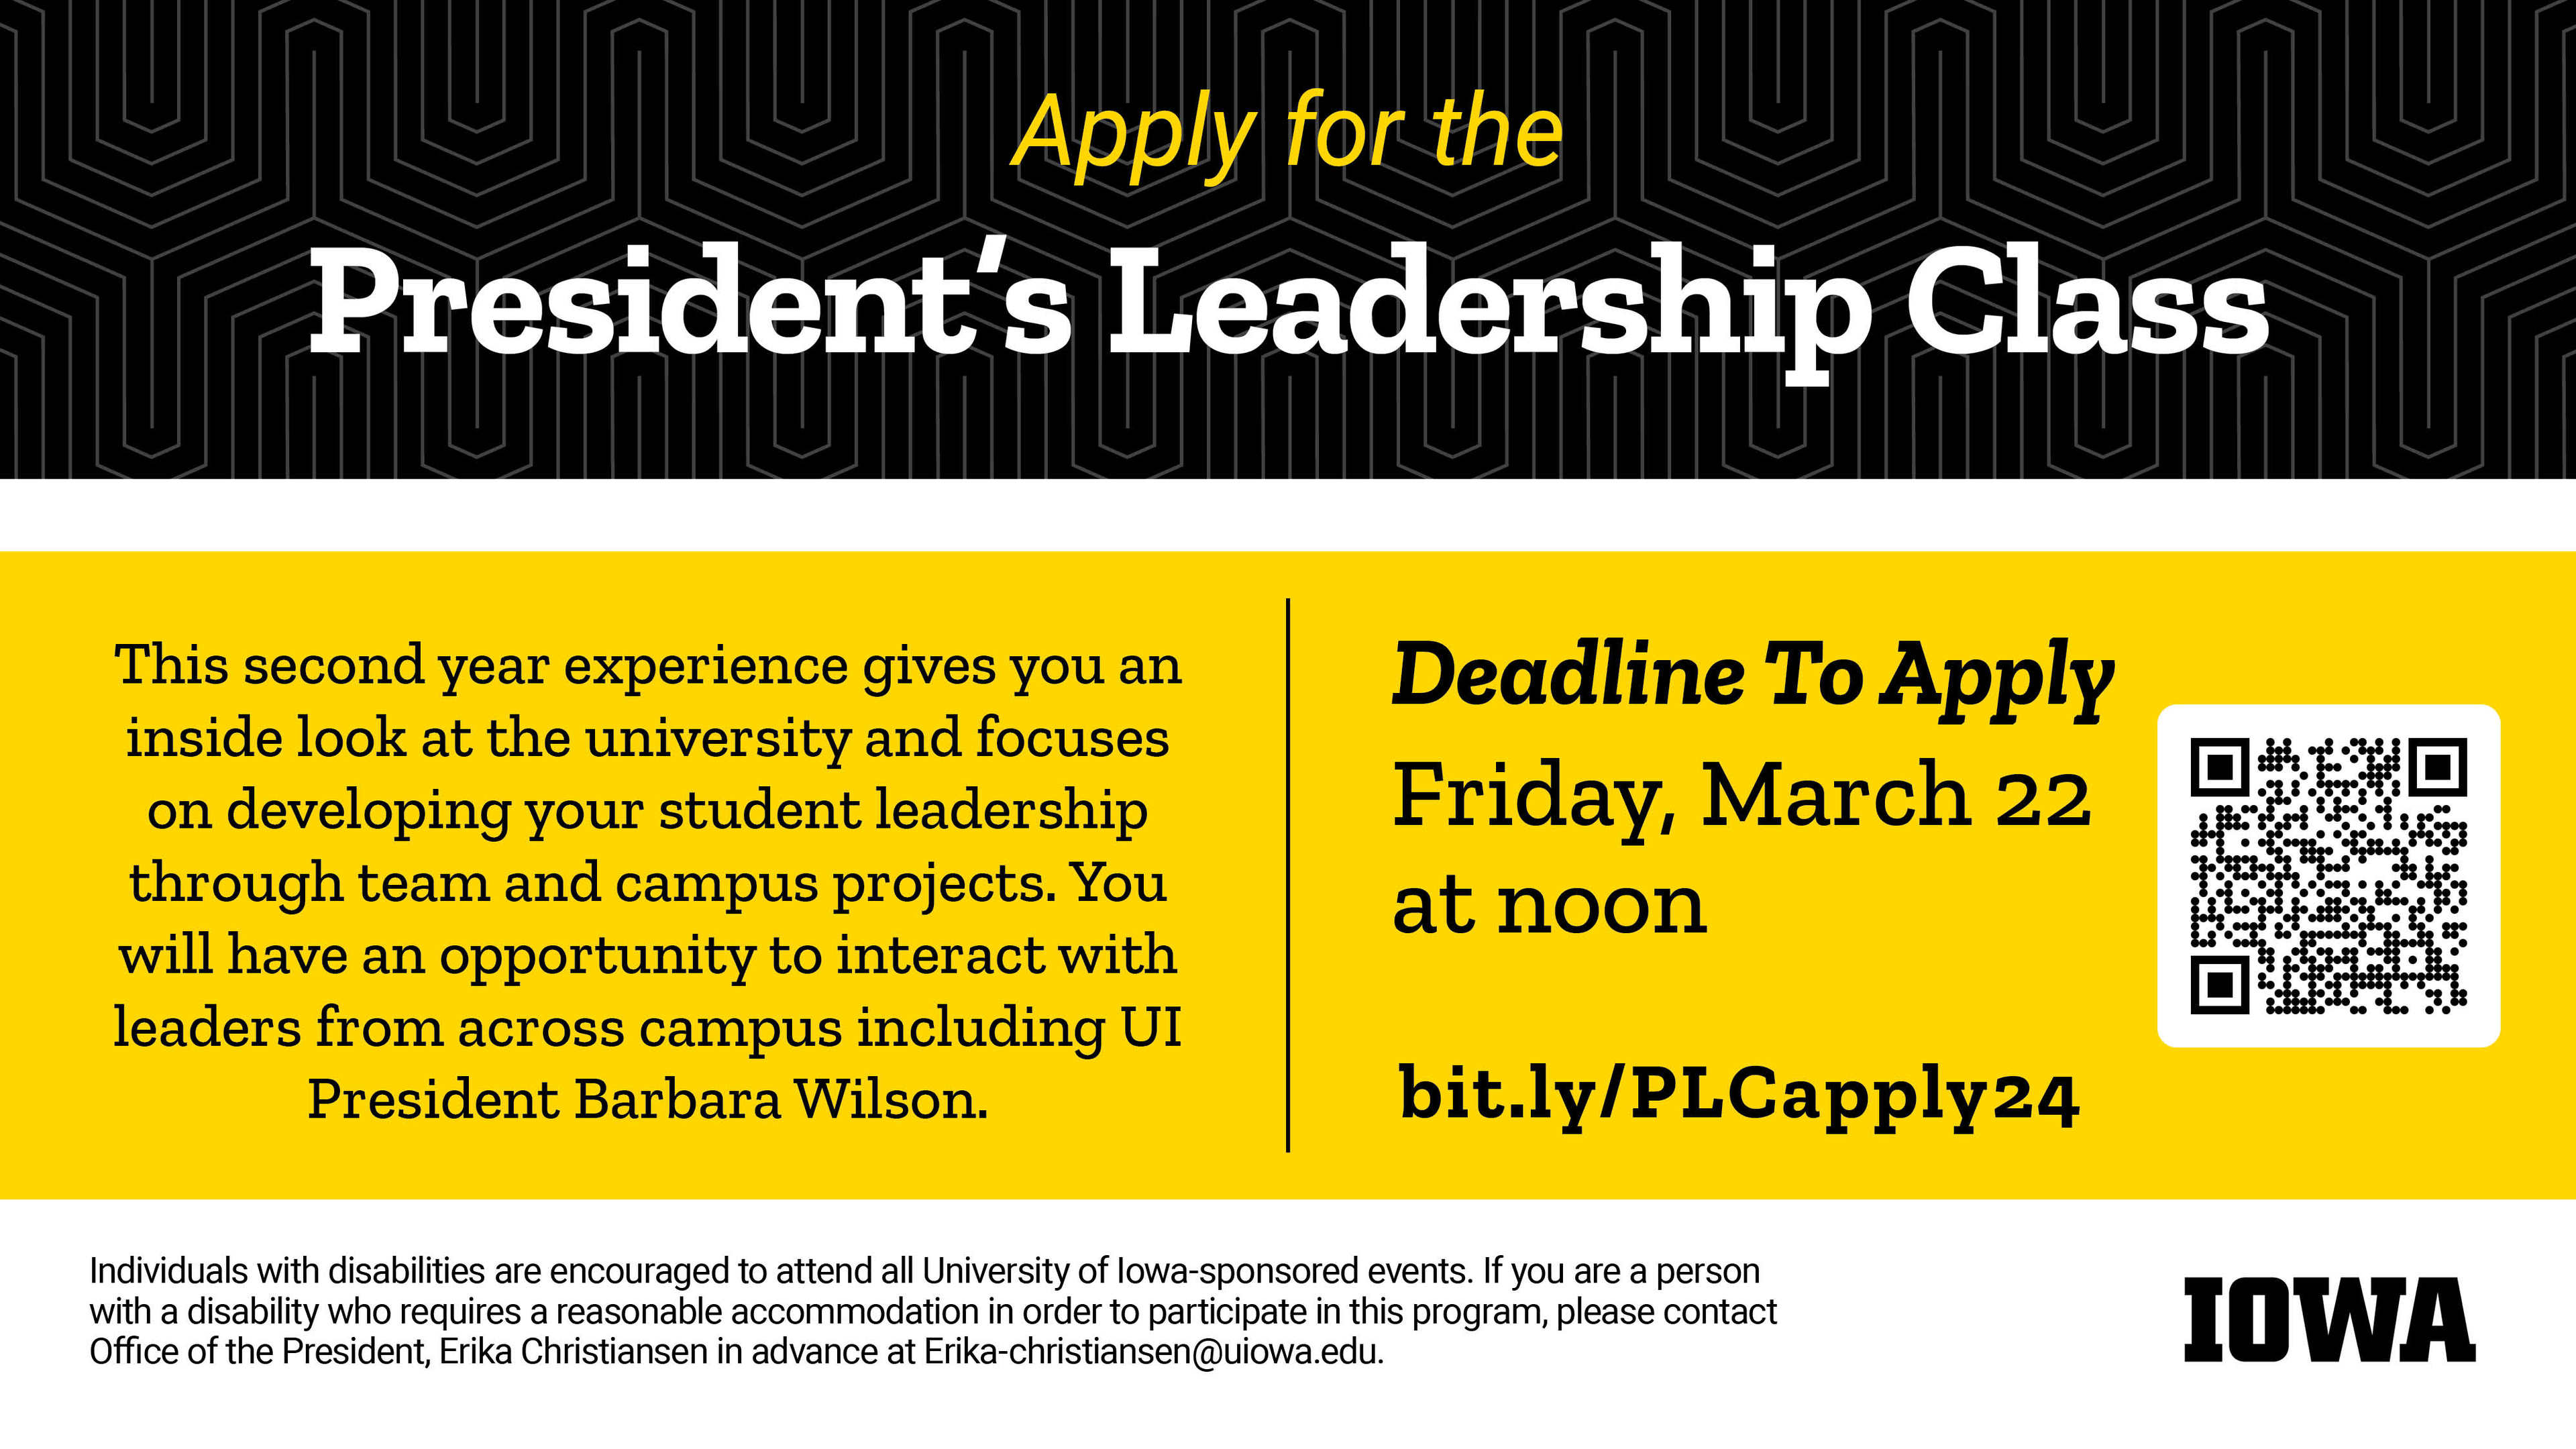 Apply for the President's Leadership Class: bit.ly/PLCapply24 | Deadline to apply is Friday, March 22 12 p.m.